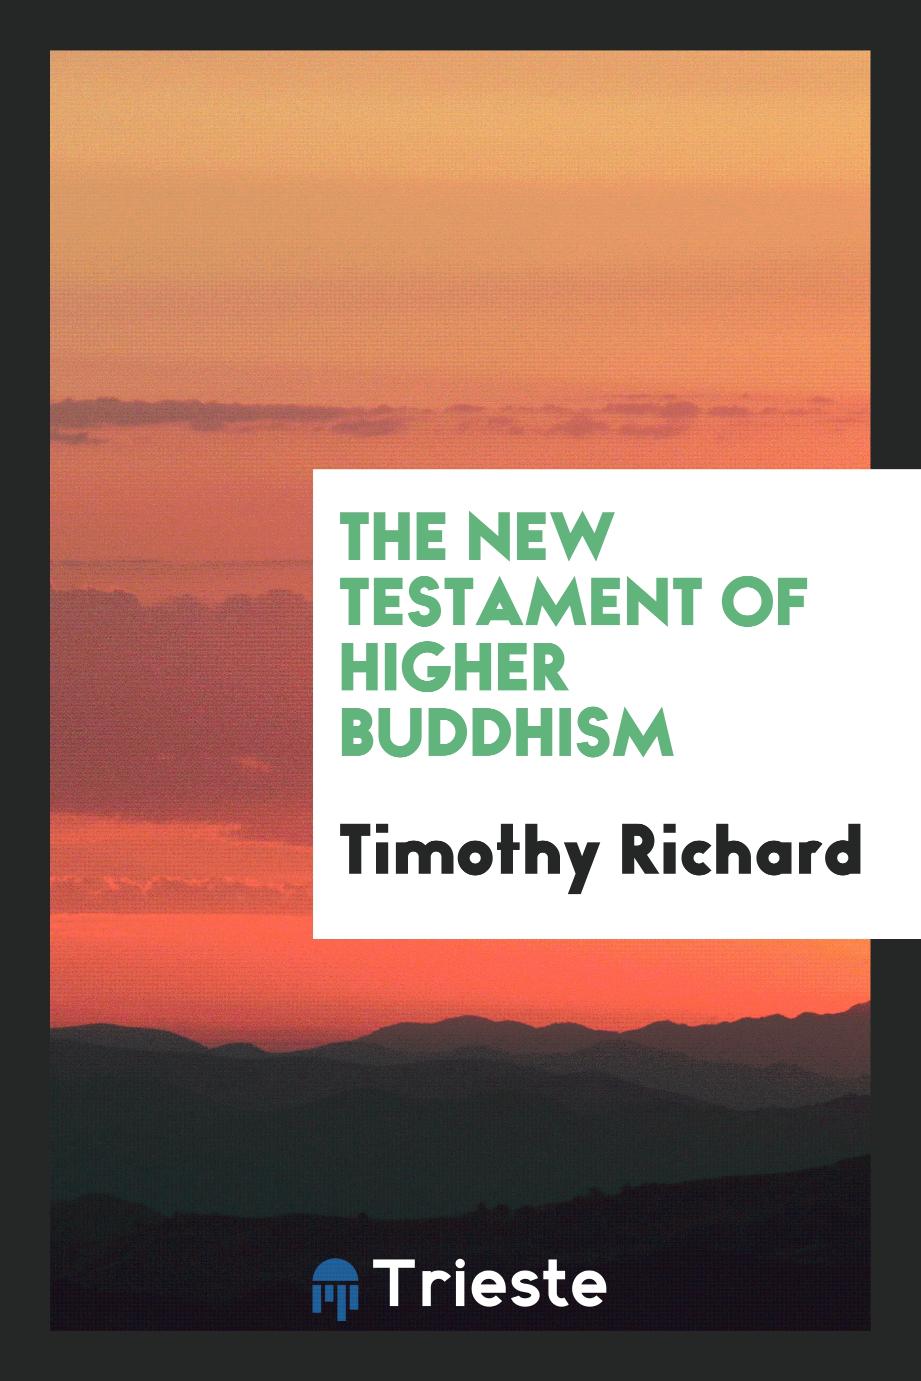 The new testament of higher Buddhism